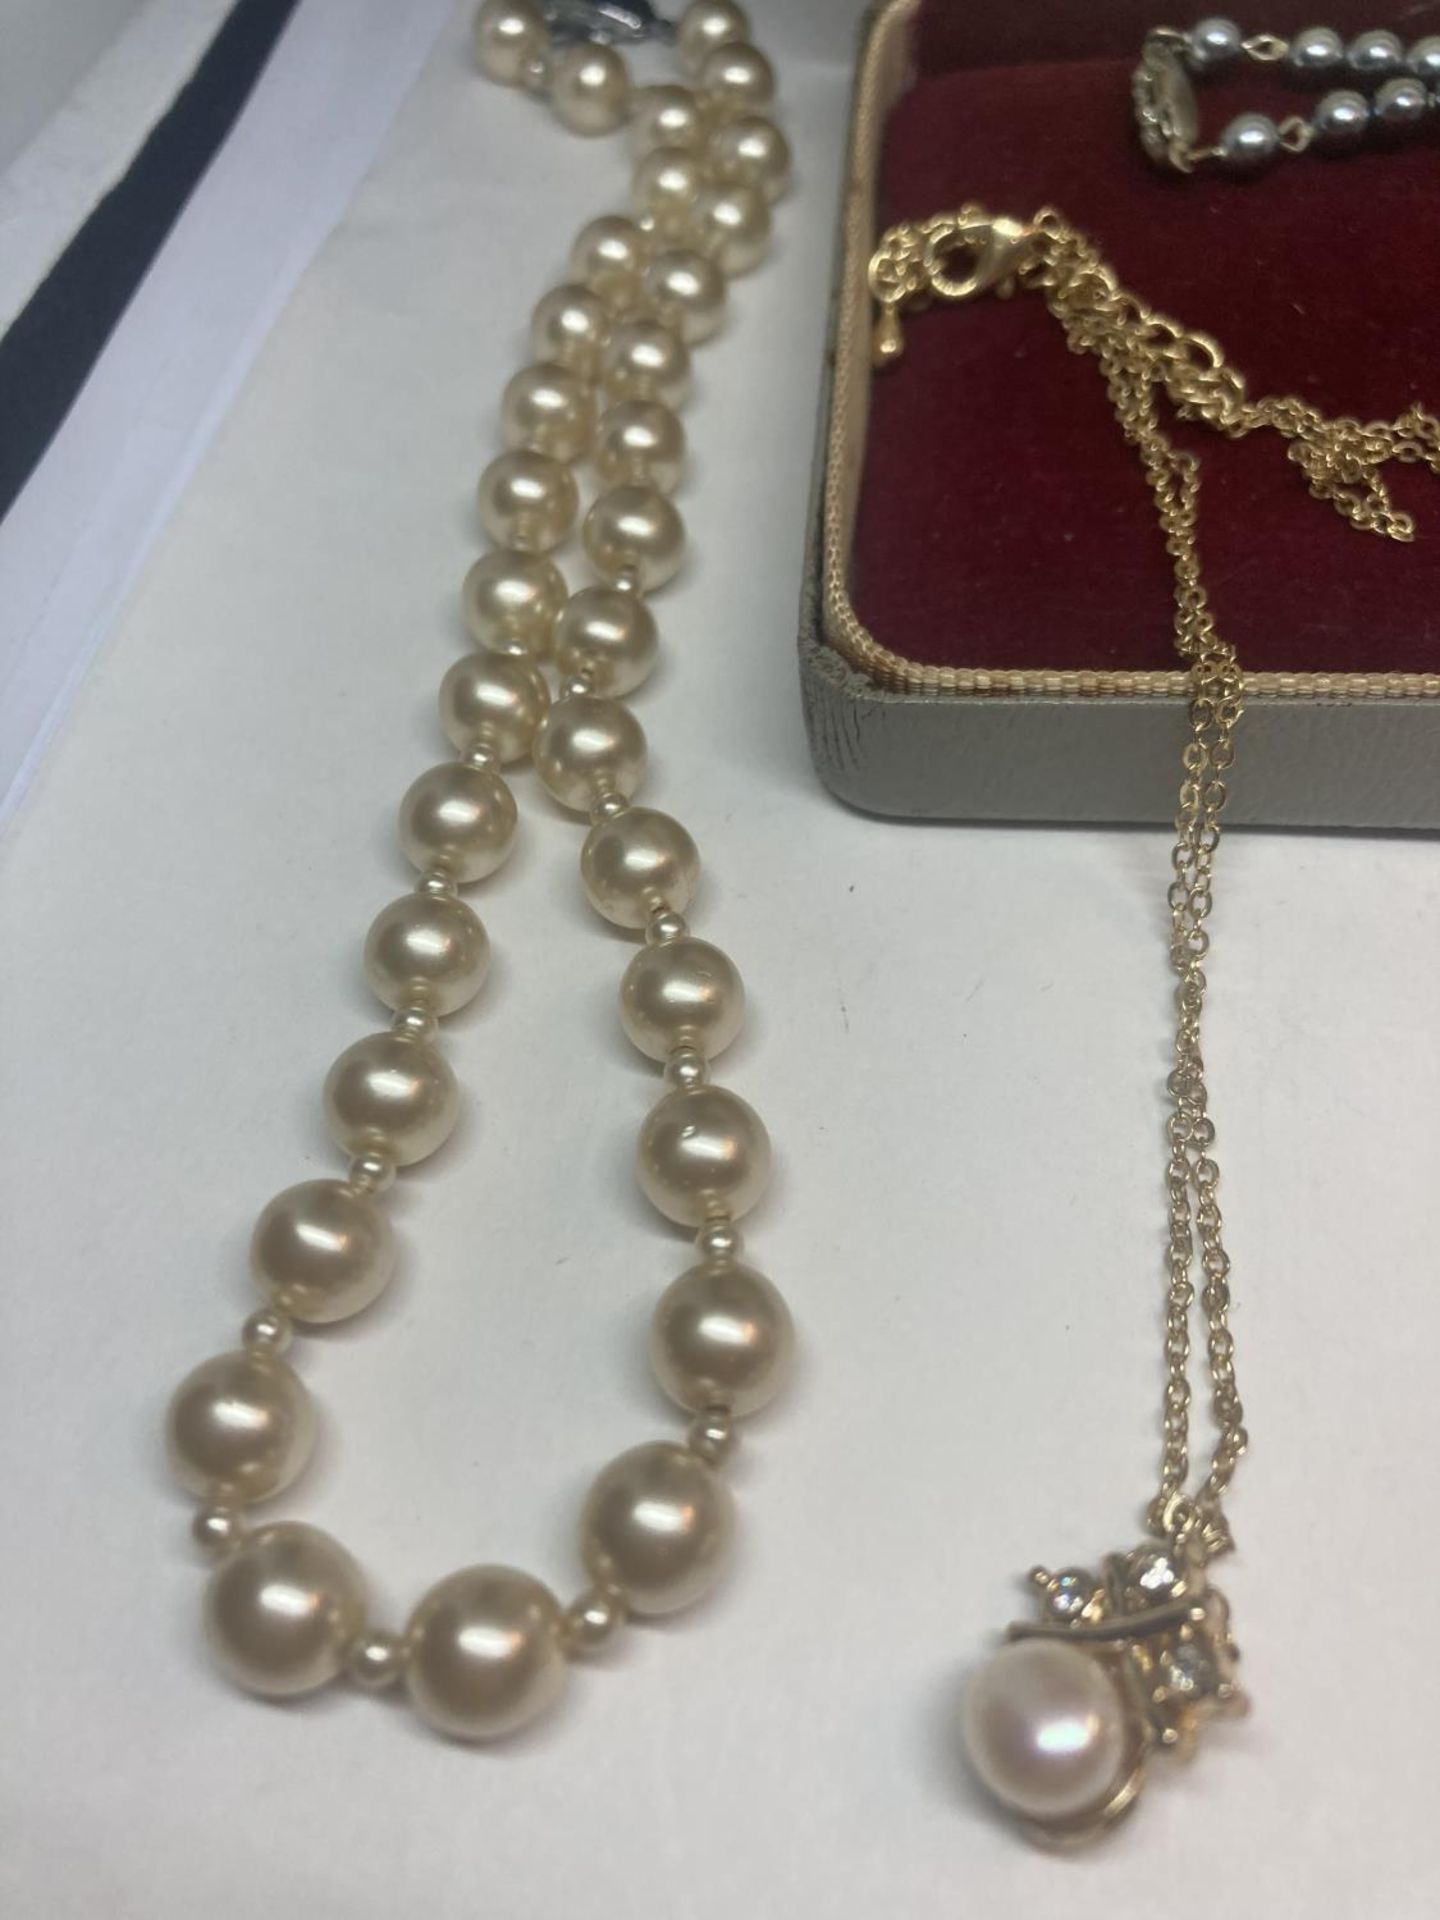 THREE PEARL NECKLACES AND A MARCASITE BROOCH - Image 3 of 8